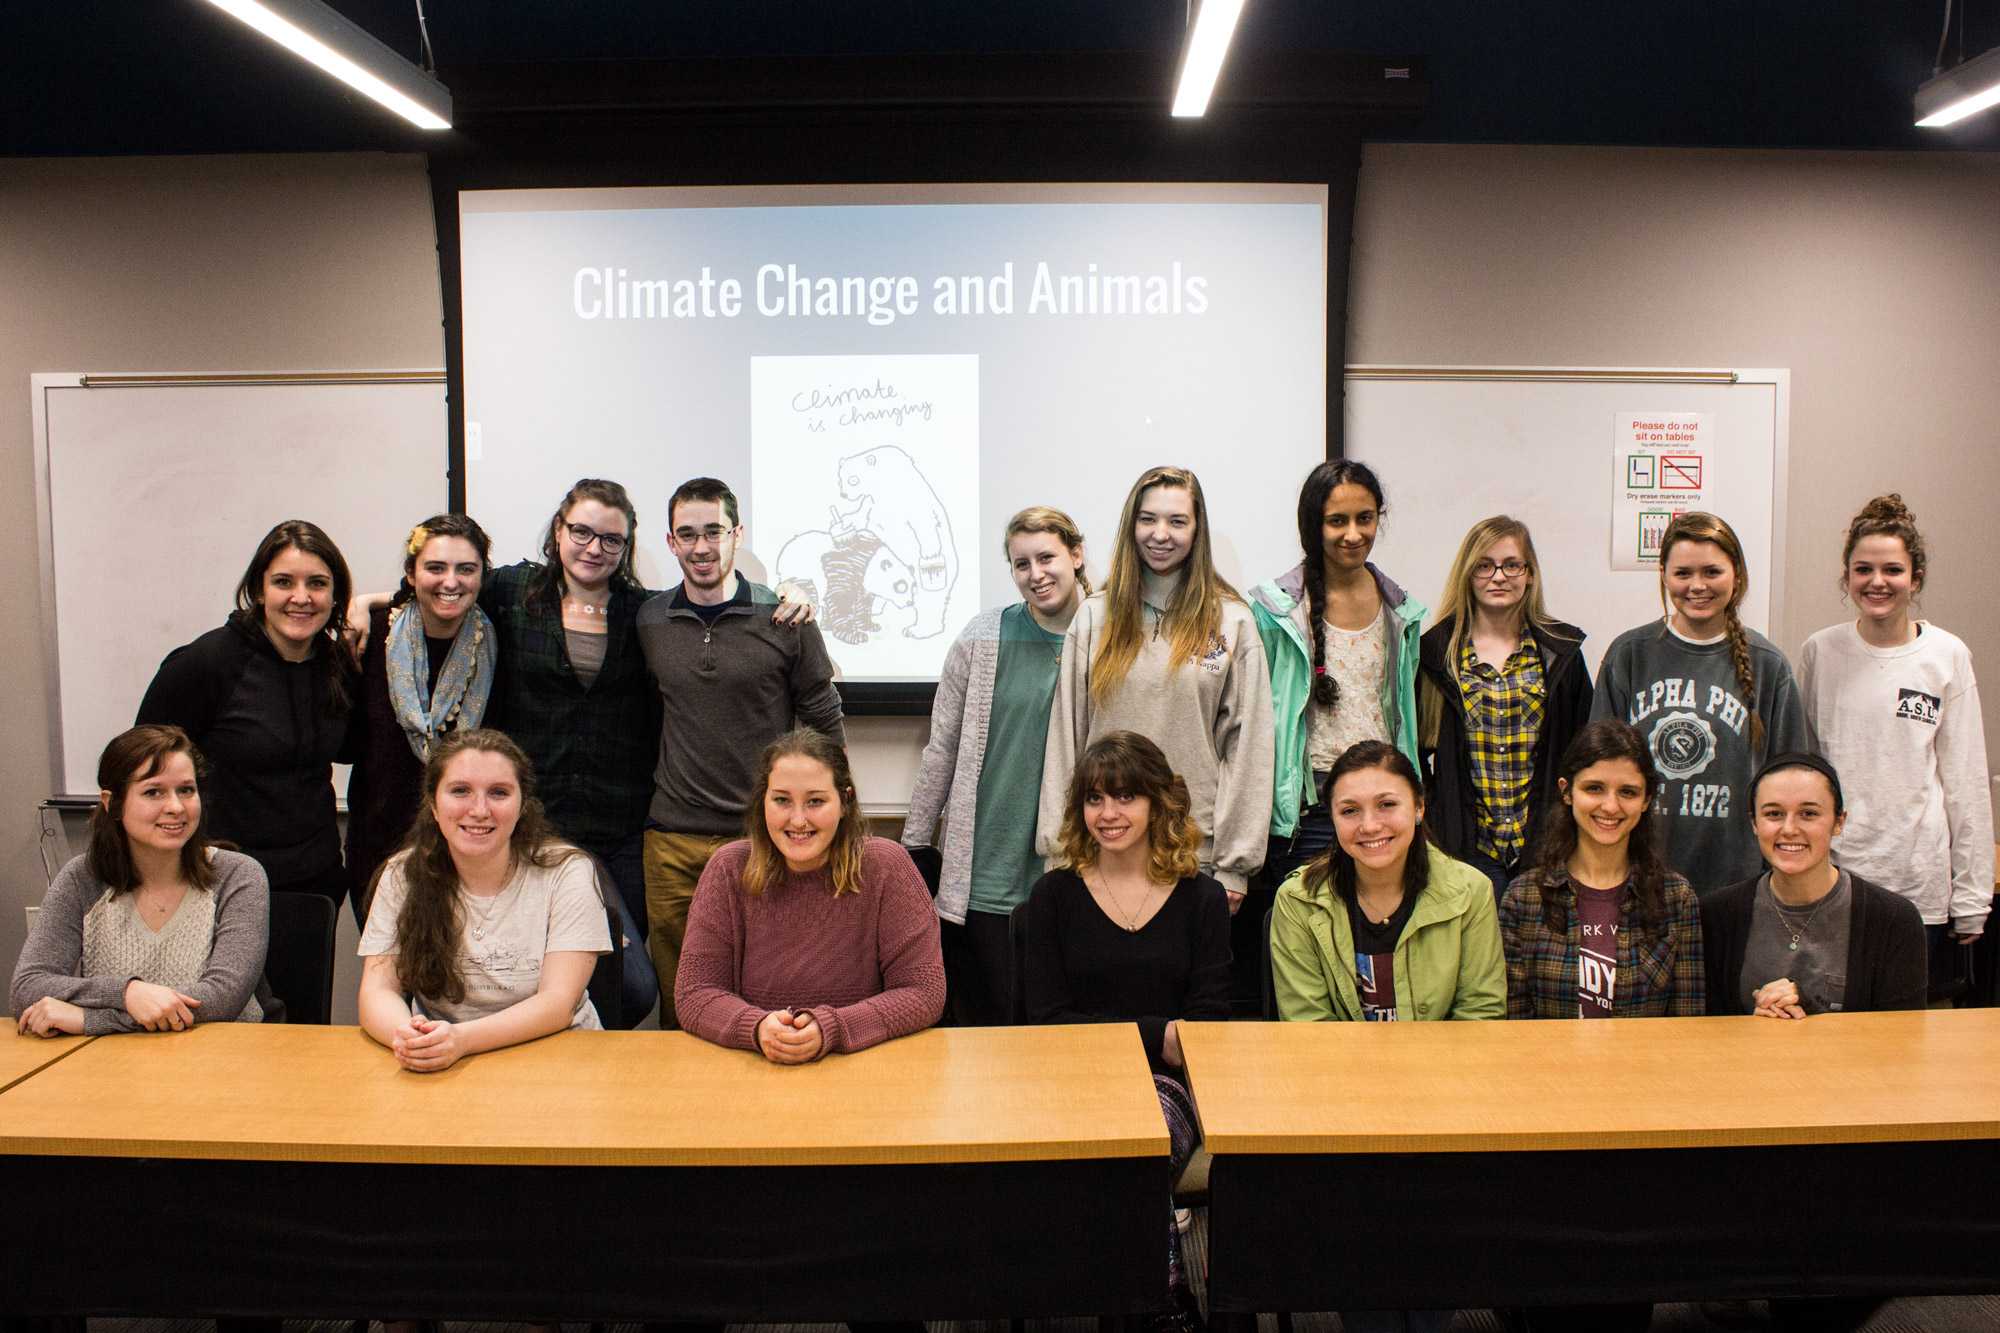 The Animal Welfare Club met in Linville Gorge on Tuesday evening. The club talks about the welfare of animals and often members volunteer at the local Humane Society. Photo by Halle Keighton.